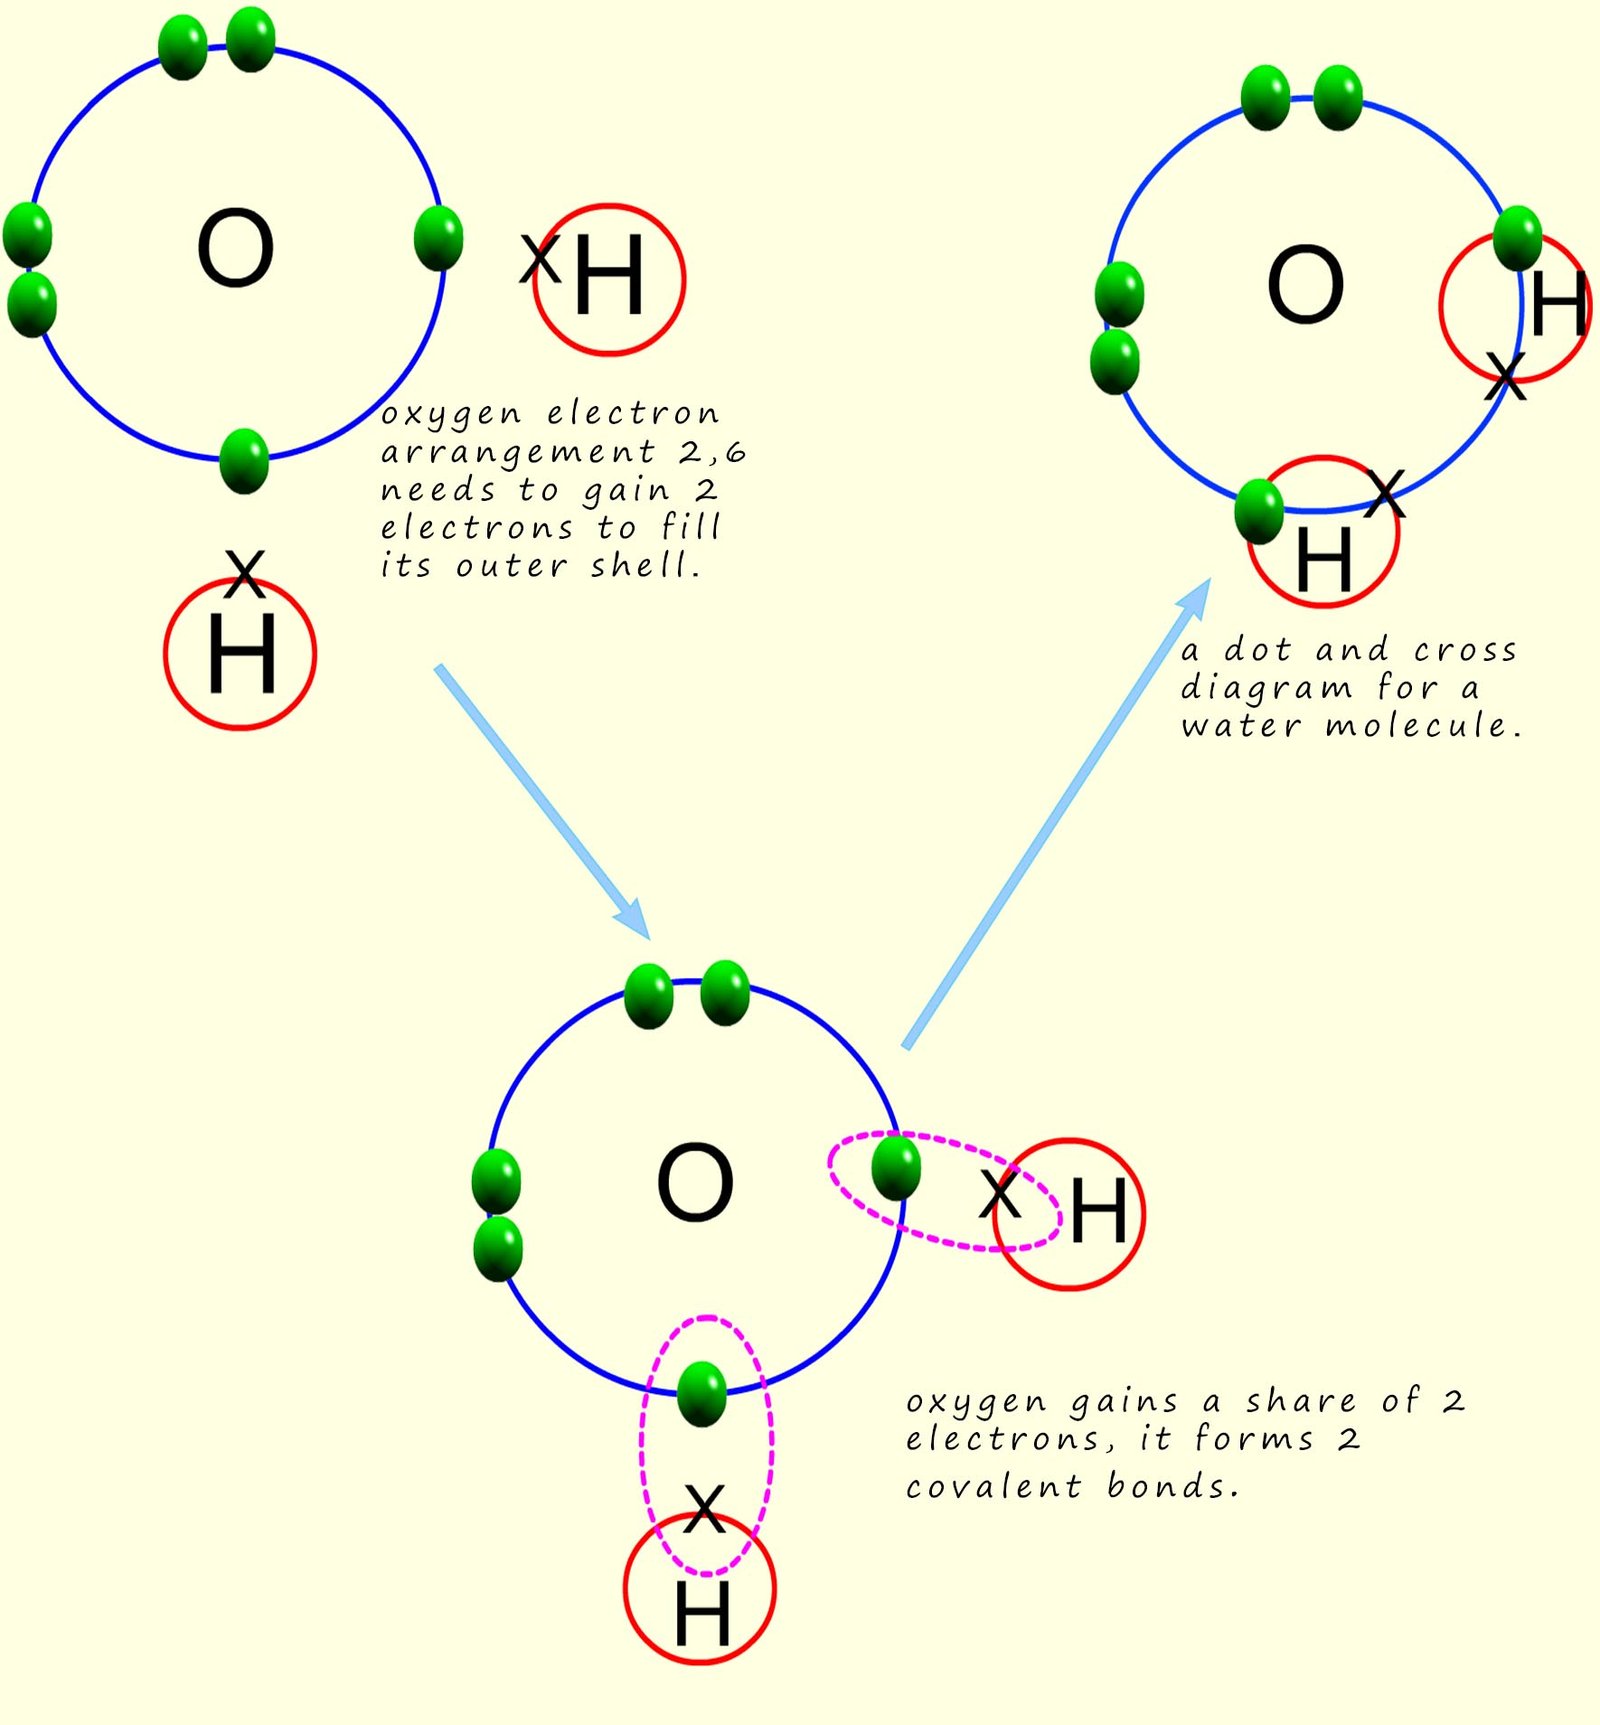 Dot and cross diagram for formation of a water molecule.